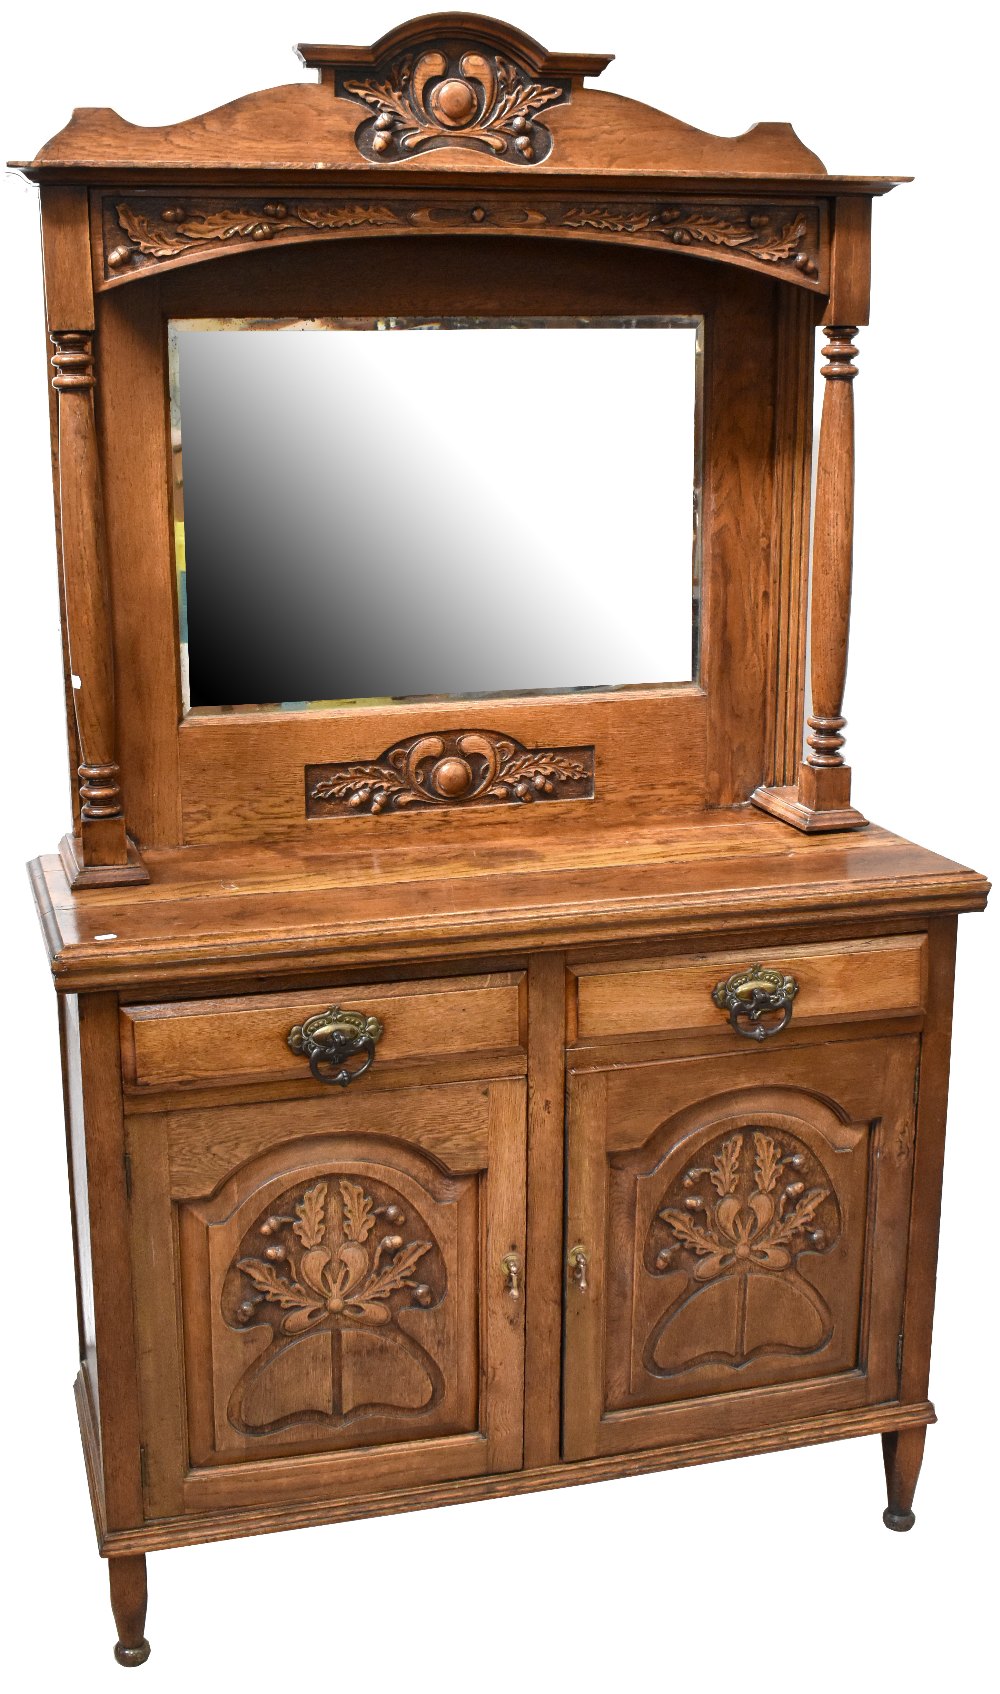 An early 20th century oak Arts and Crafts style dresser,